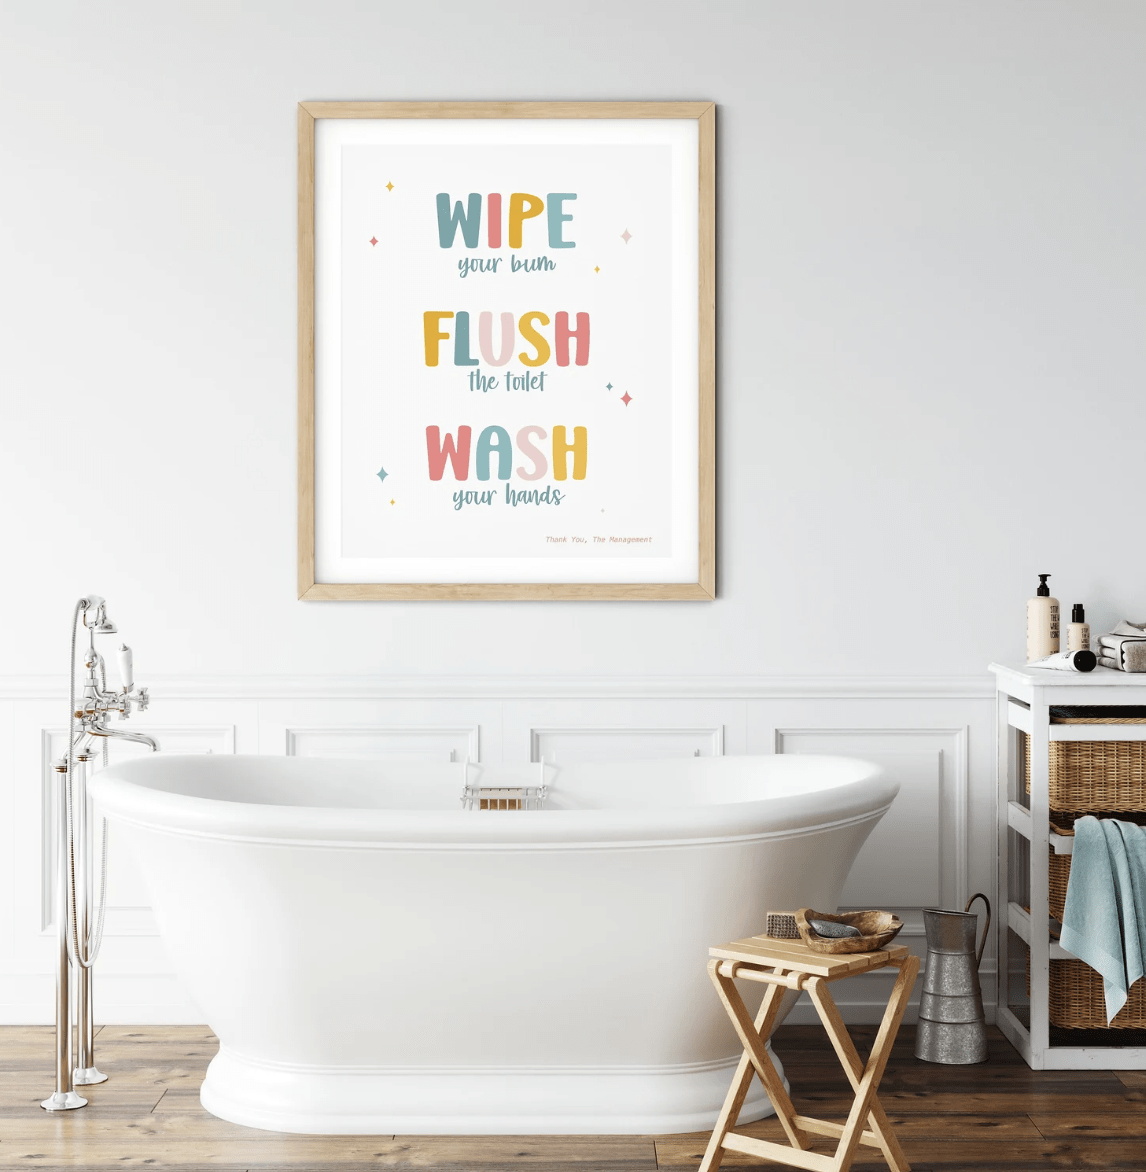 wipe flush wash kids colorful bathroom sign hanging over white freestanding tub with chrome faucets=